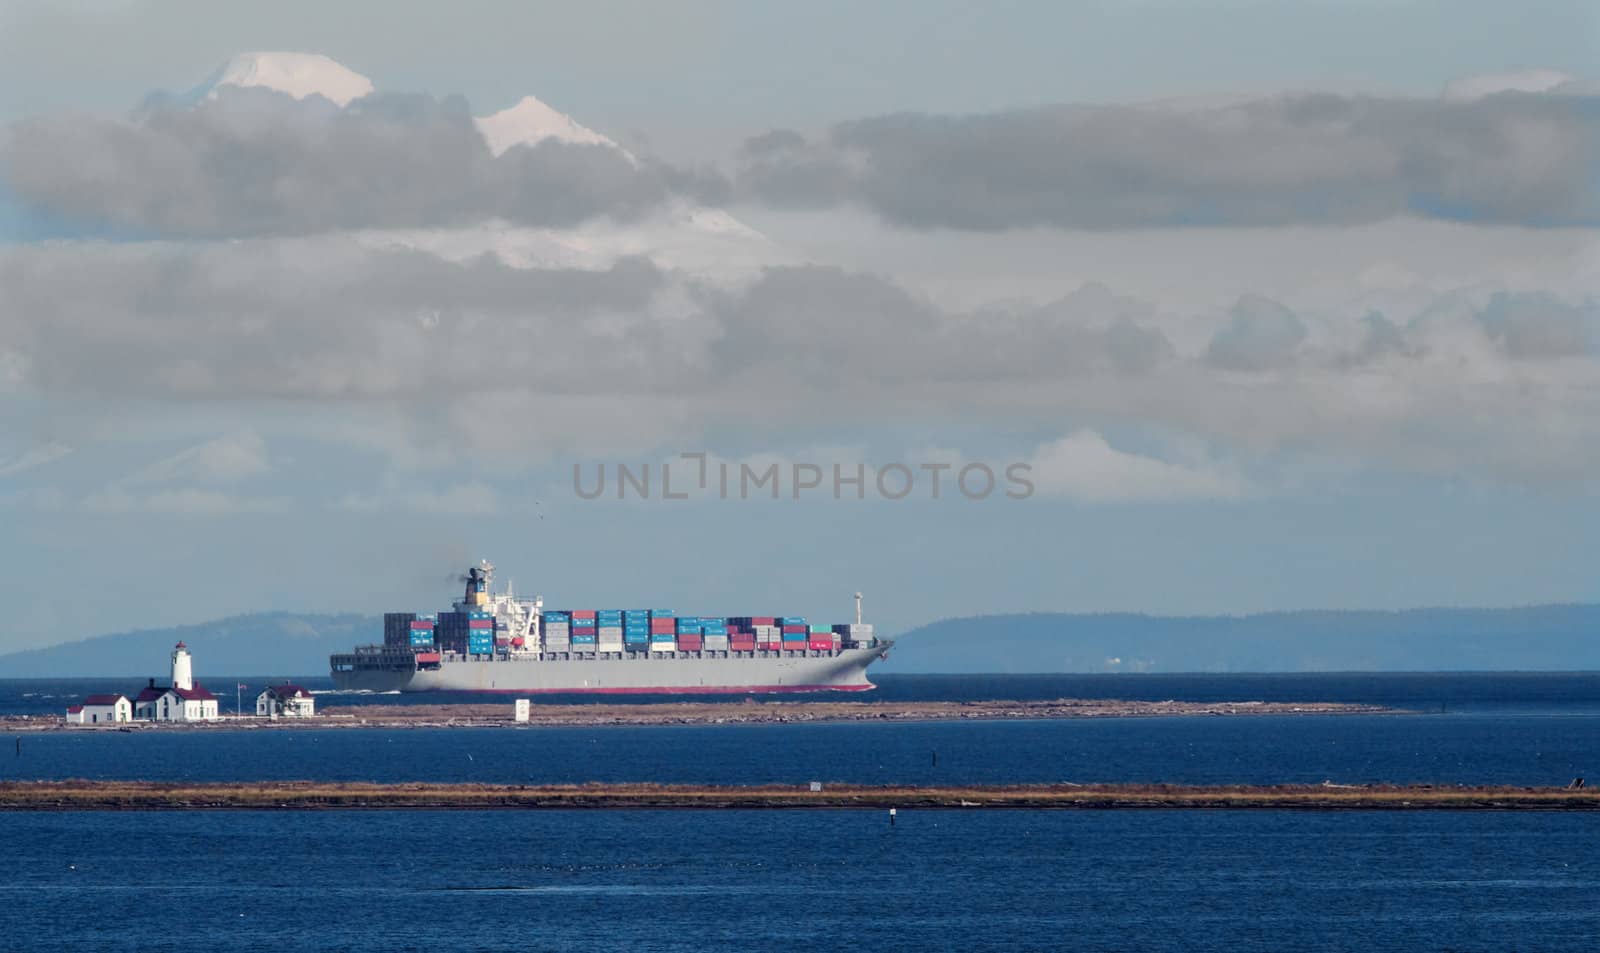 Fully loaded frieghter passing a light house on a Juan de Fuca spit